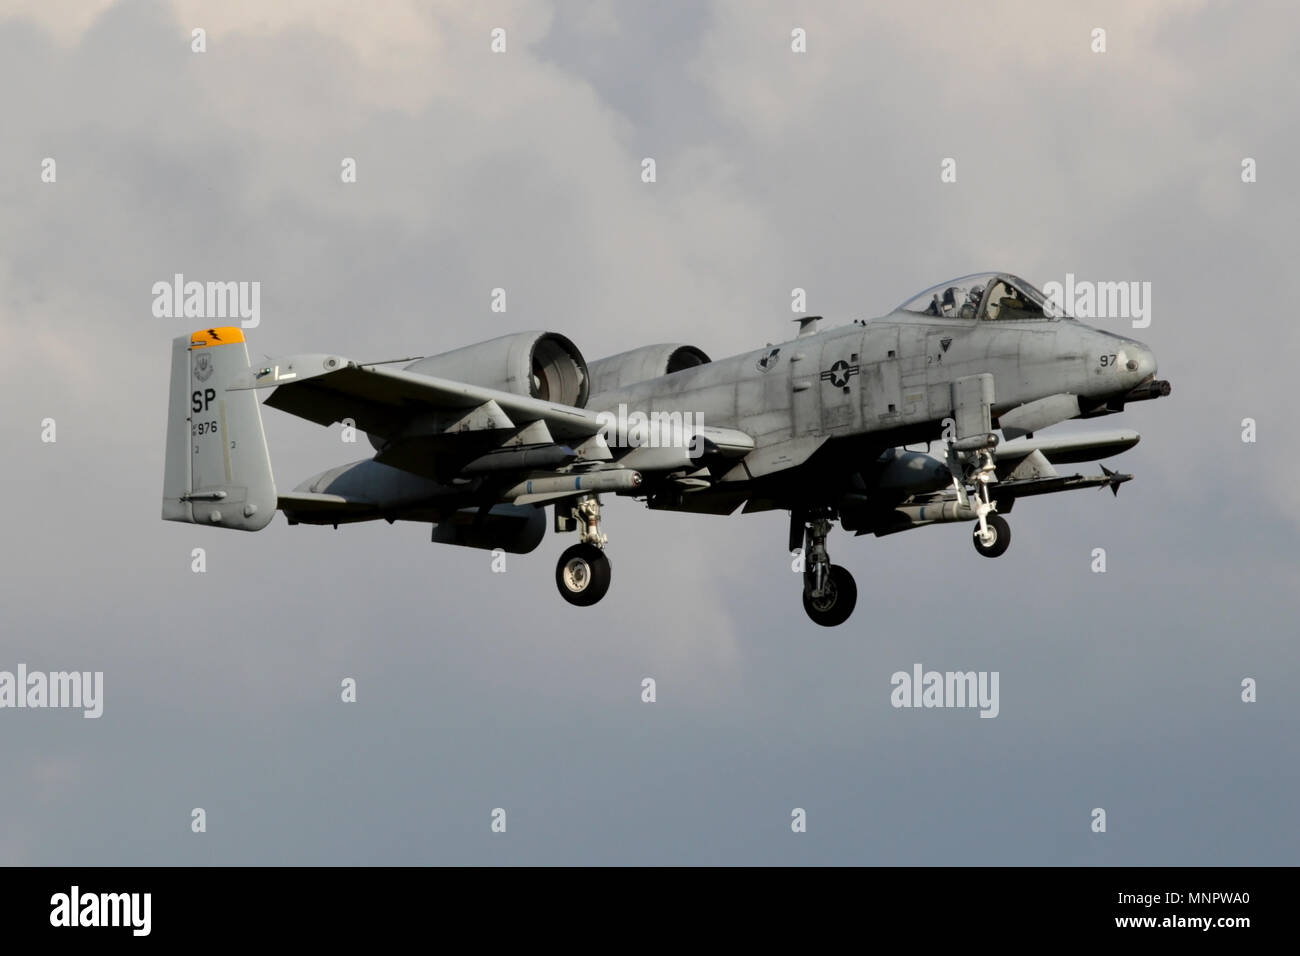 Fairchild A-10C Thunderbolt II from the 81st Fighter Squadron at Spangdahlem landing at RAF Lakenheath during a detached training exercise. Stock Photo